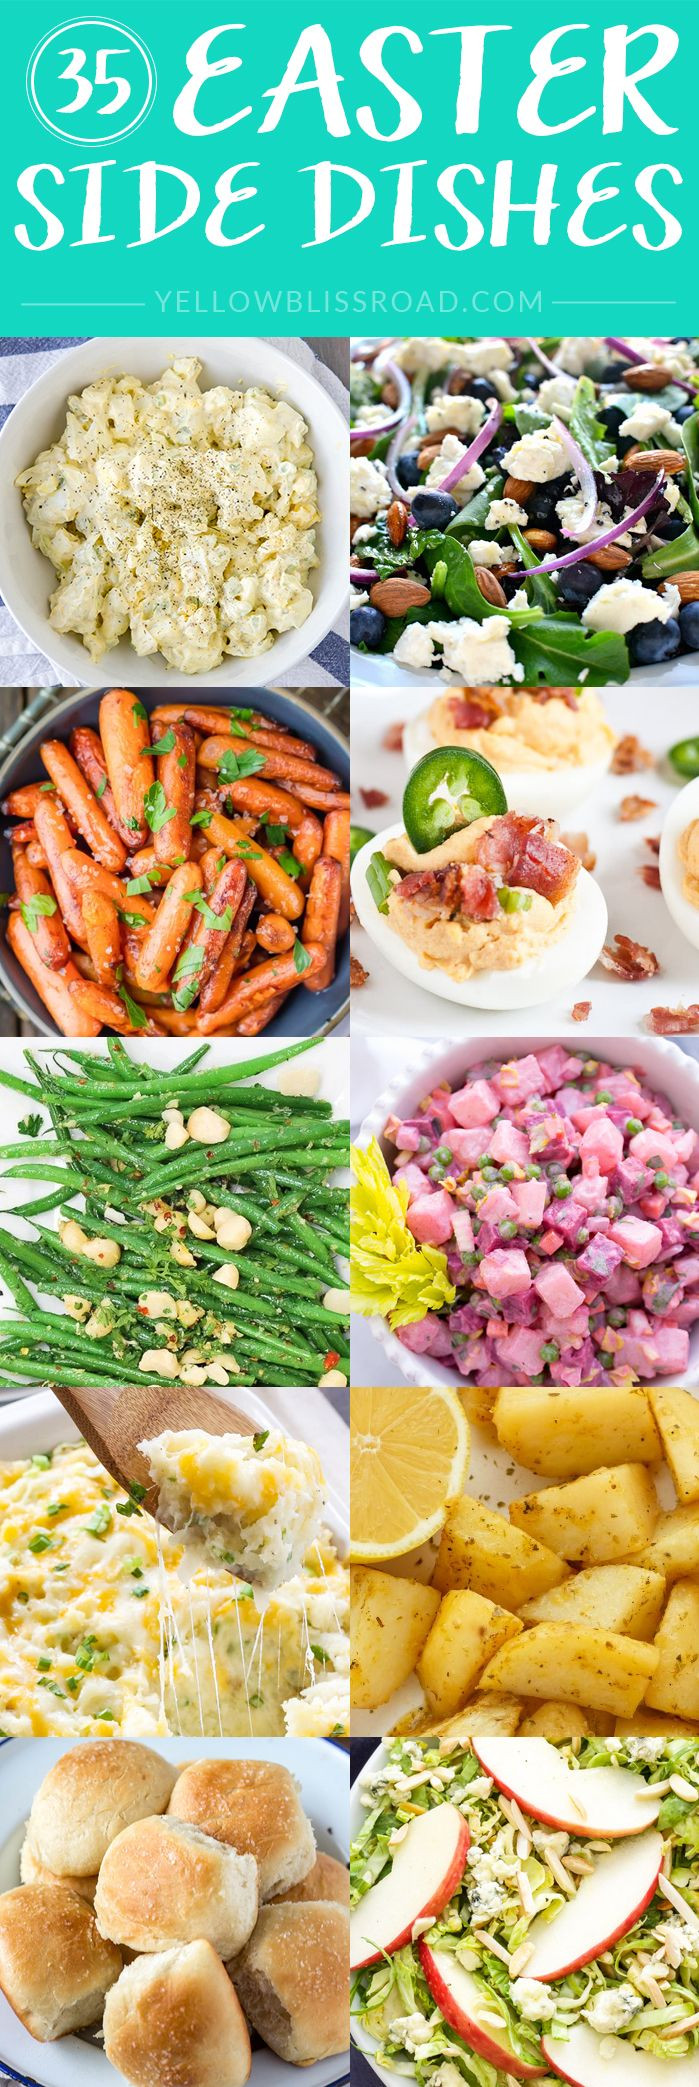 Brunch Vegetable Side Dishes
 27 Easter Side Dishes Yum yum